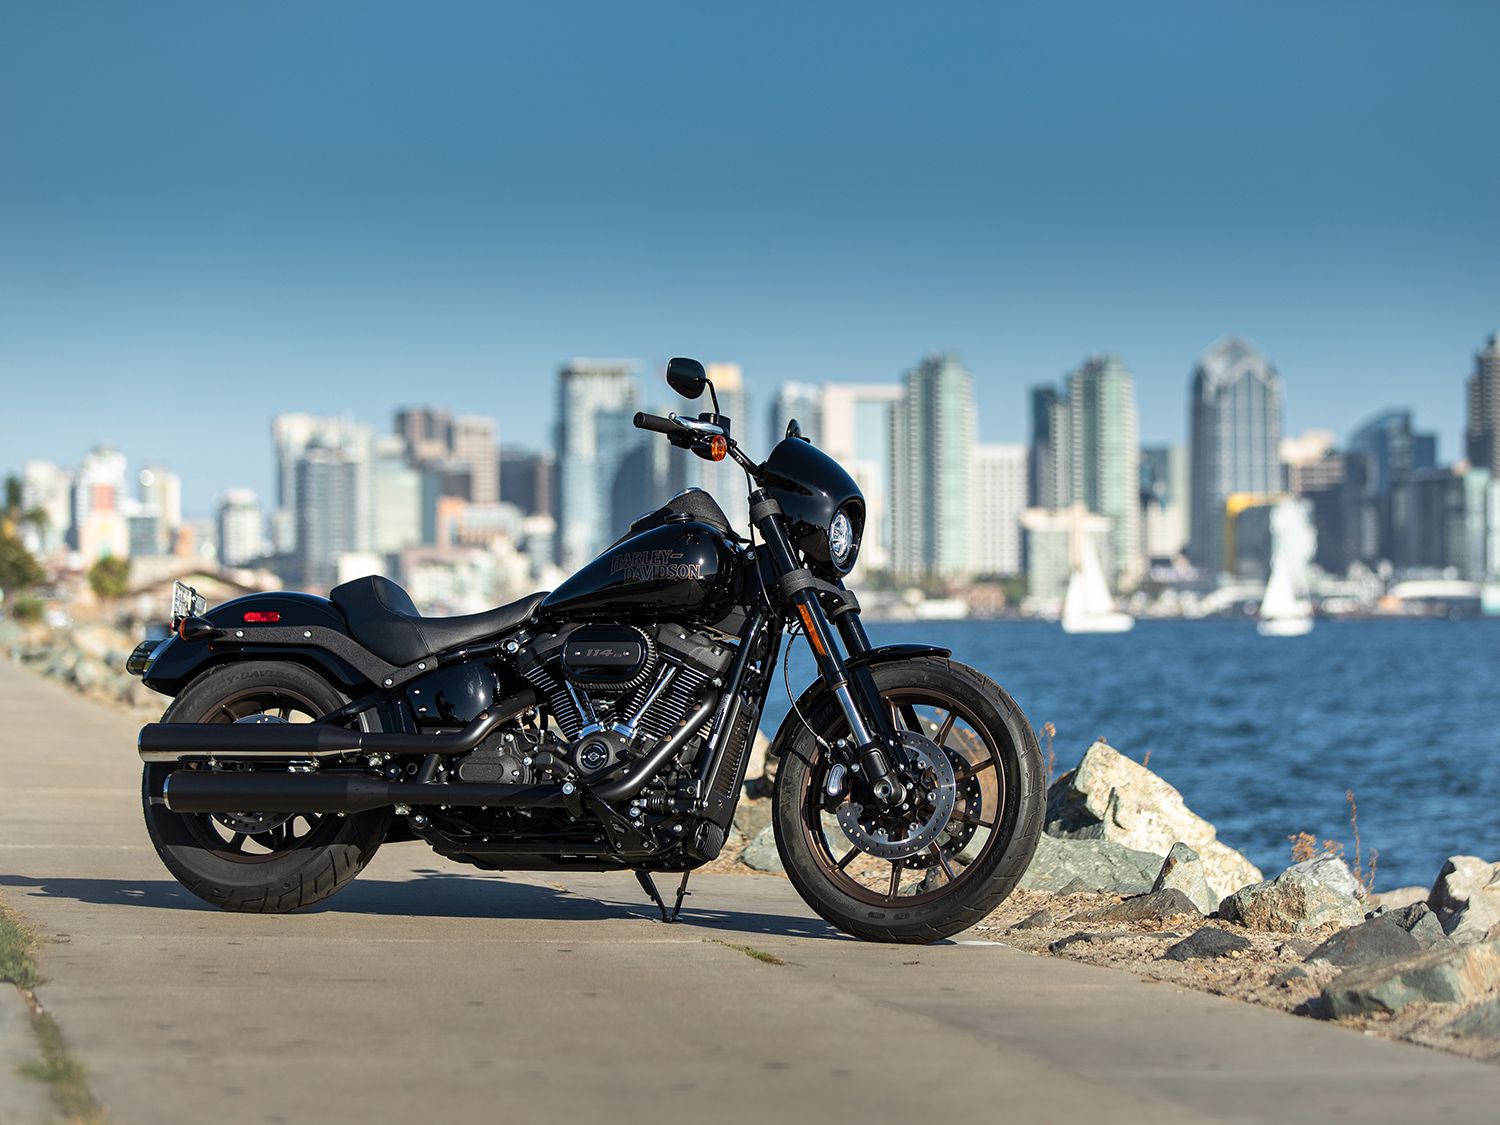 2020 Harley Davidson Low Rider S First Ride Review Motorcycle Cruiser